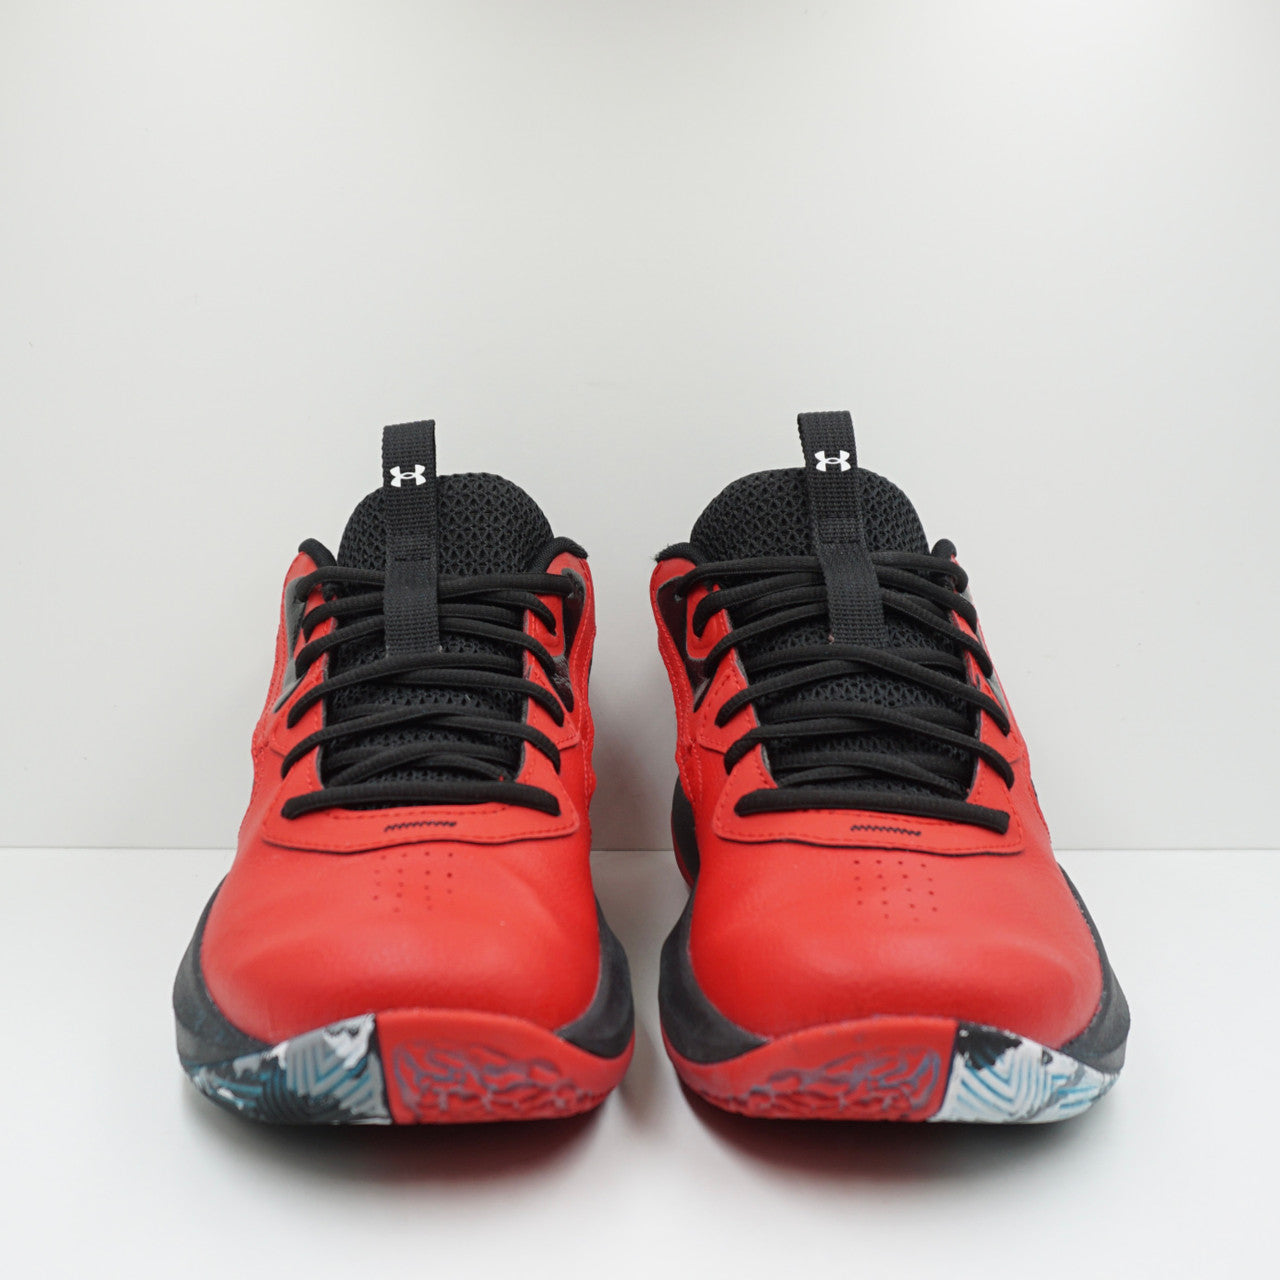 Under Armour Lockdown 6 Basketball Red